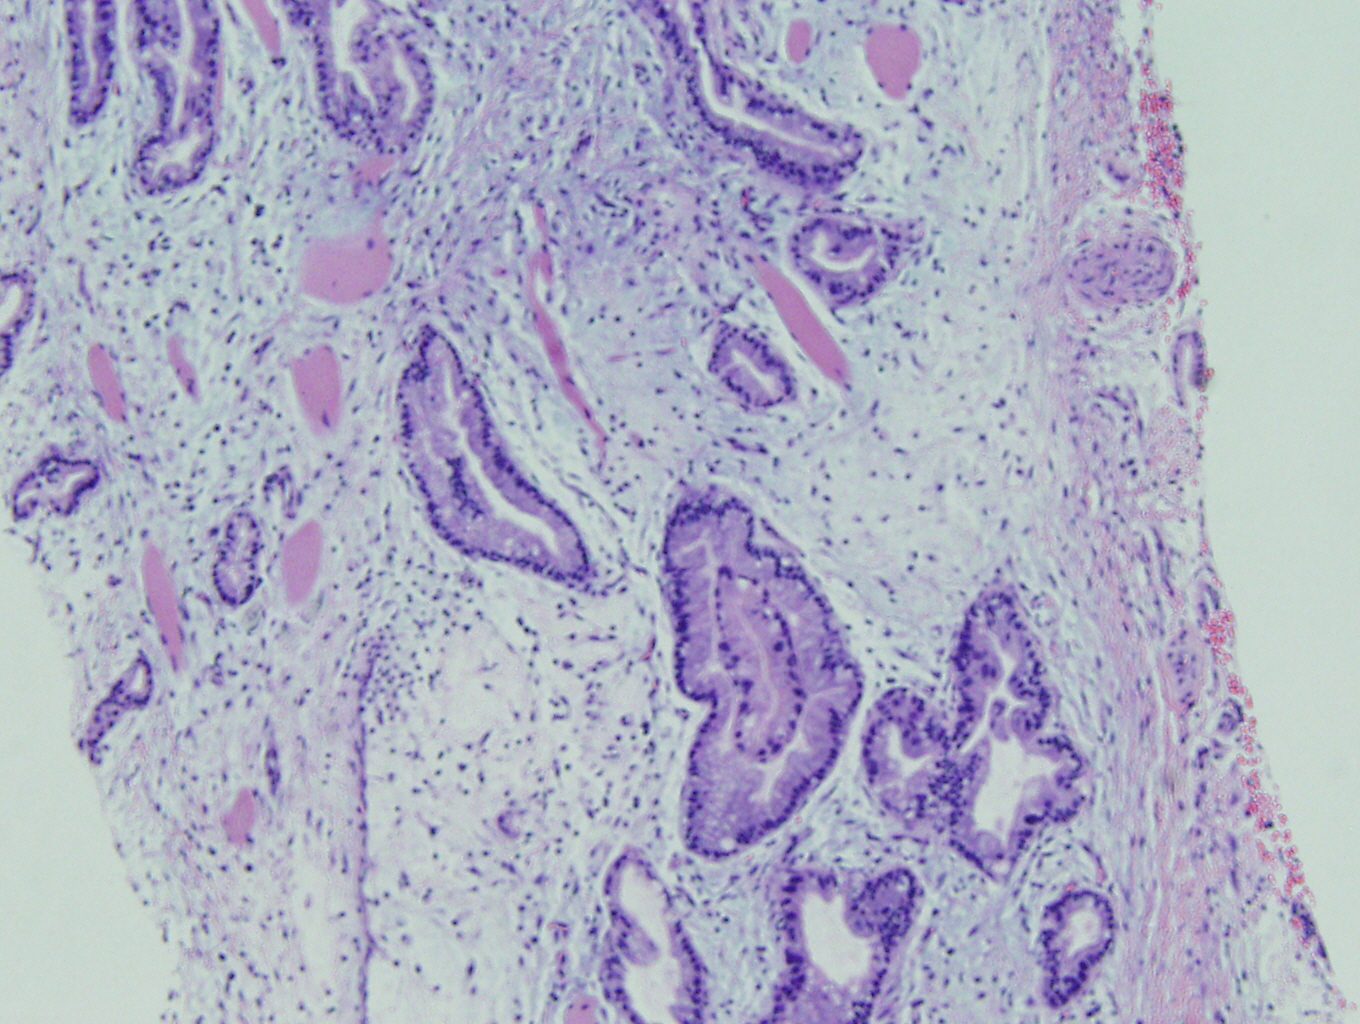 Case of the Month, Mar. 2013: Figure 4